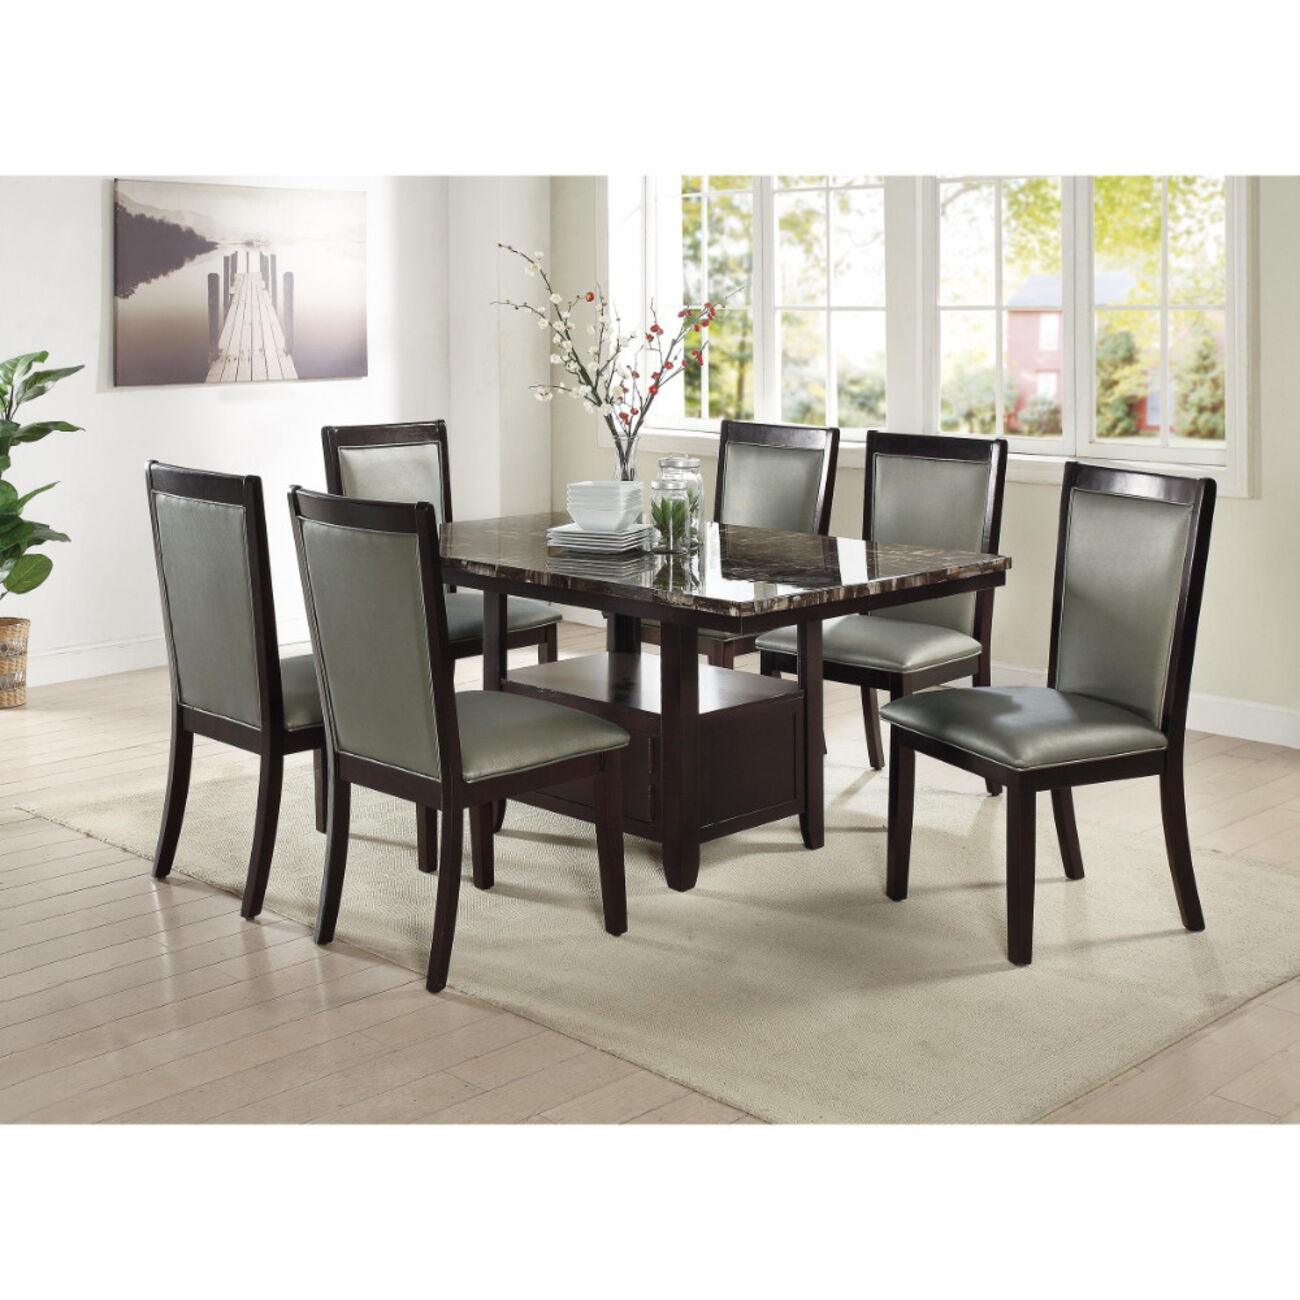 Wooden Dining Table With Spacious Bottom Storage Dark Brown